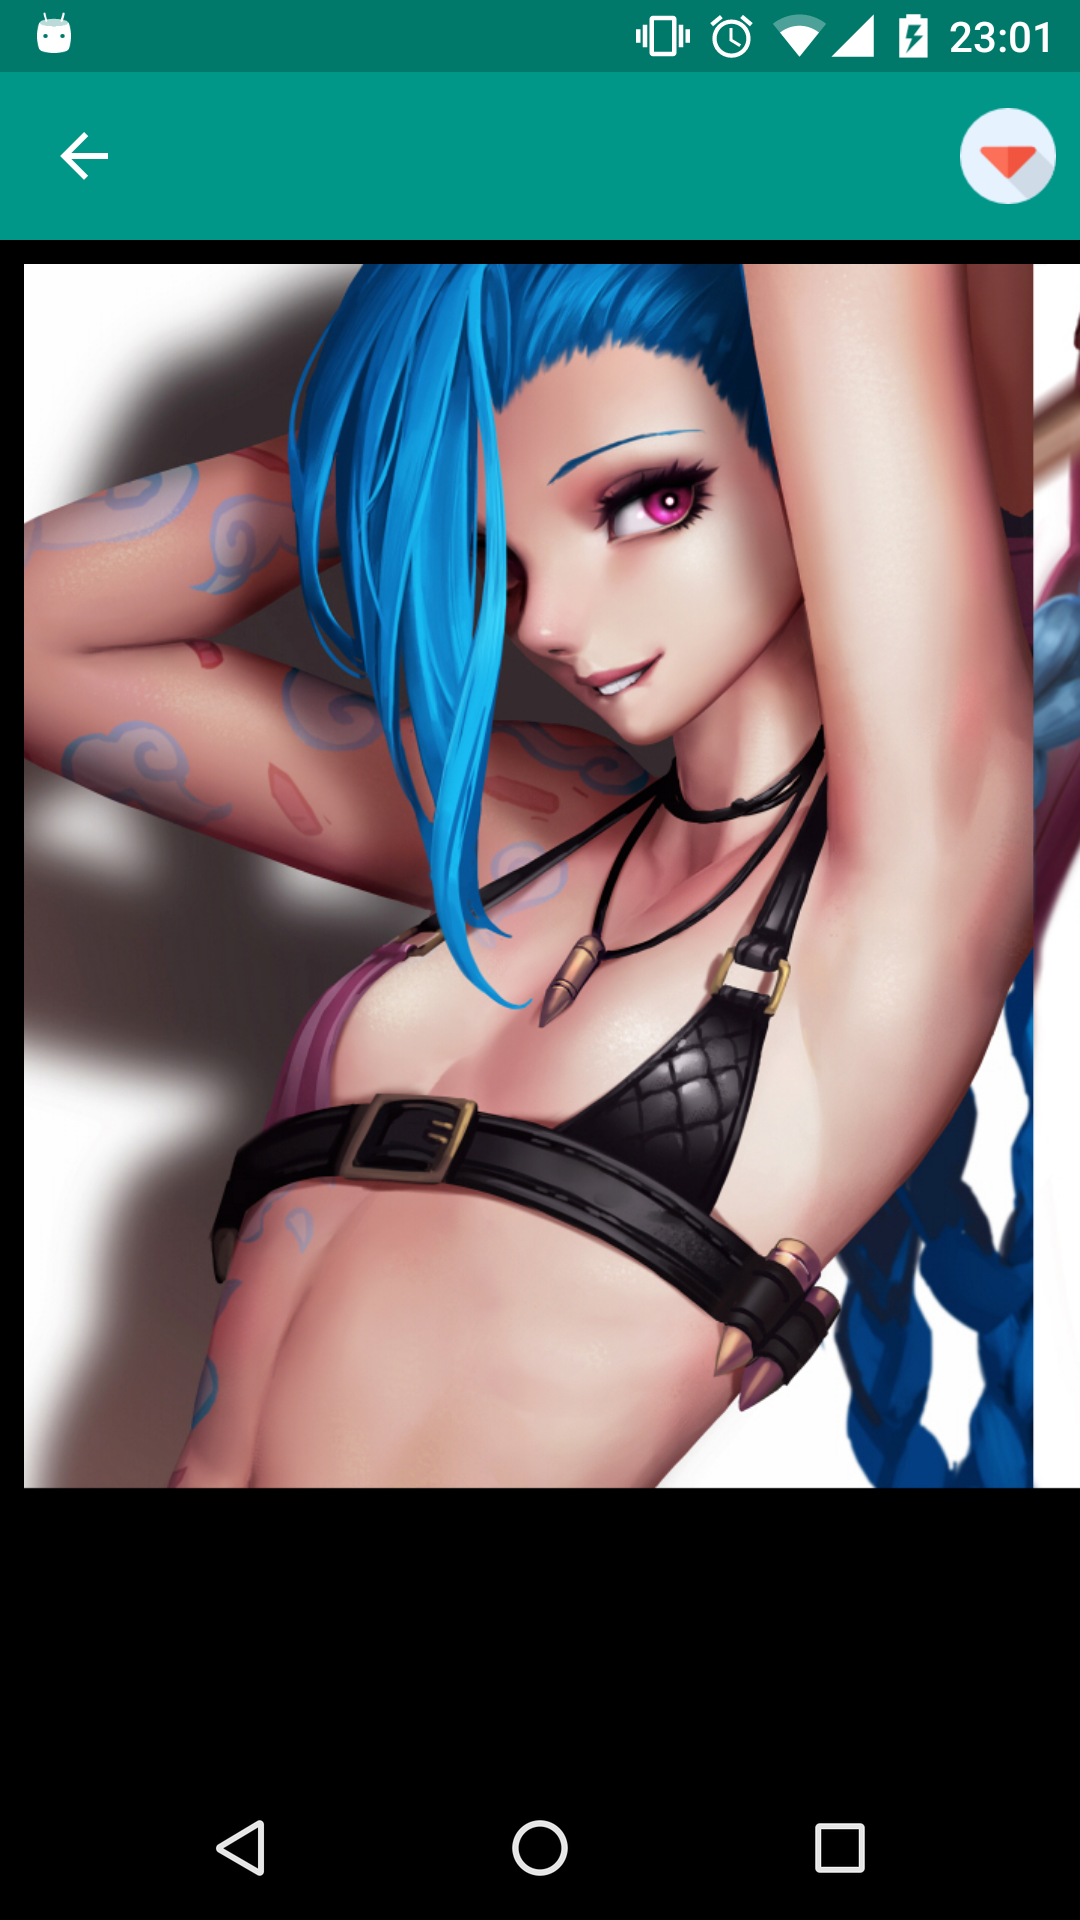 League of Legends wallpapers app,bisexpics,apps,erotica,porn,image,download,pic,apk,pics,hentai,picture,hetai,sexy,legends,wallpapers,collection,browser,gallery,applications,apks,league,hot,backgrounds,pornstar